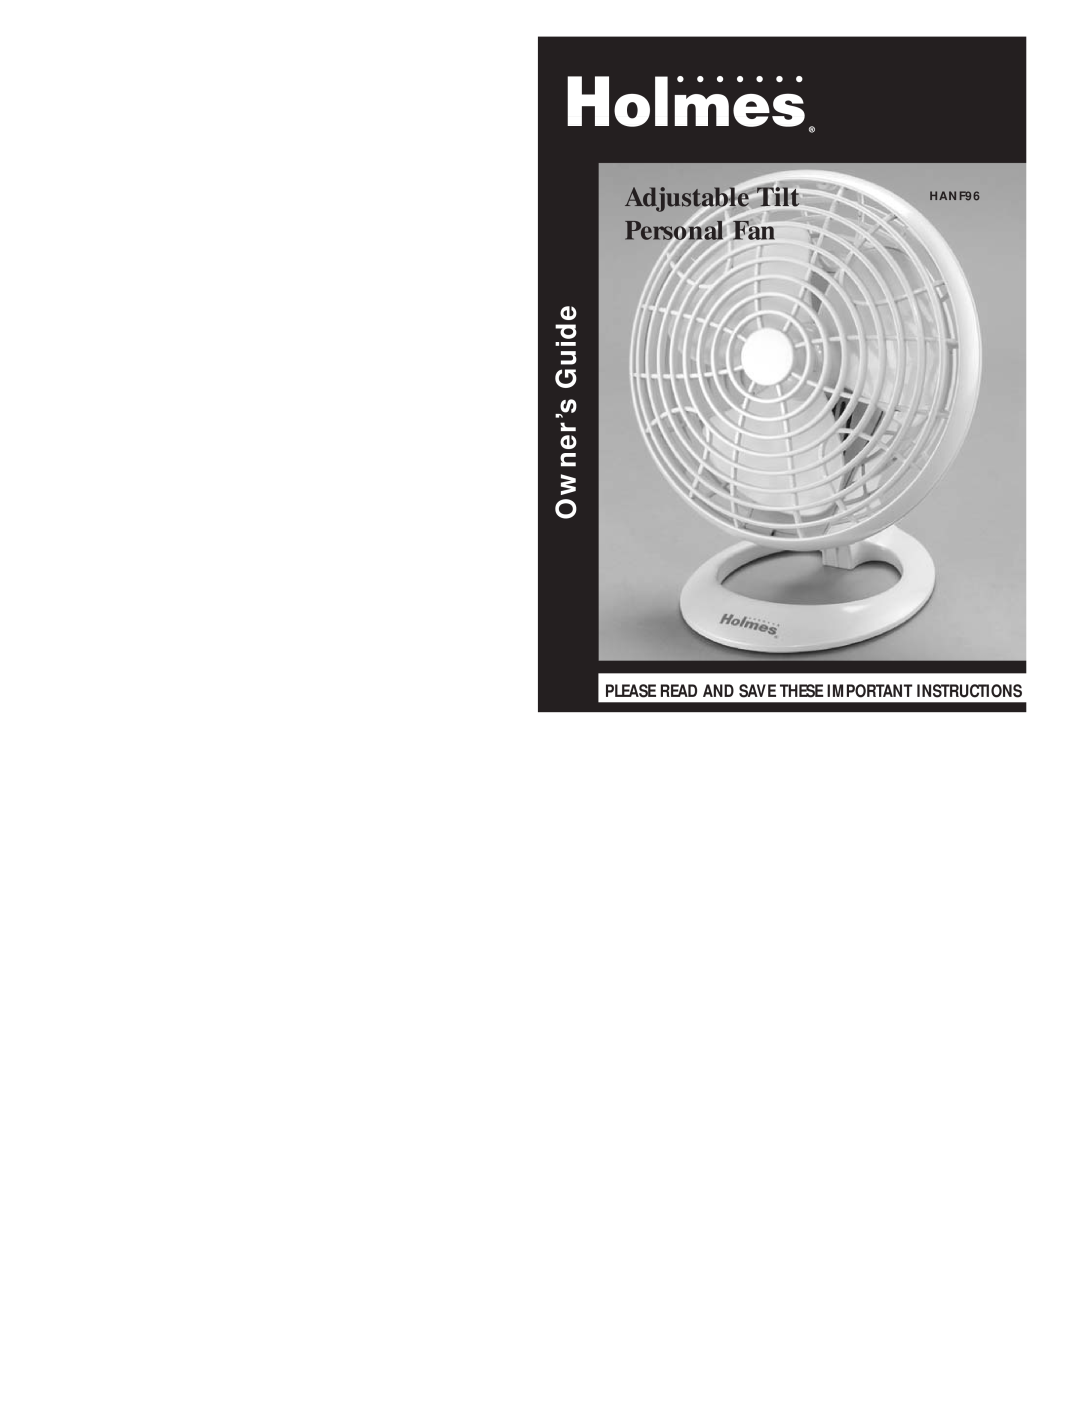 Holmes HANF96 warranty Adjustable Tilt, Personal Fan, Owner’s Guide, Please Read And Save These Important Instructions 